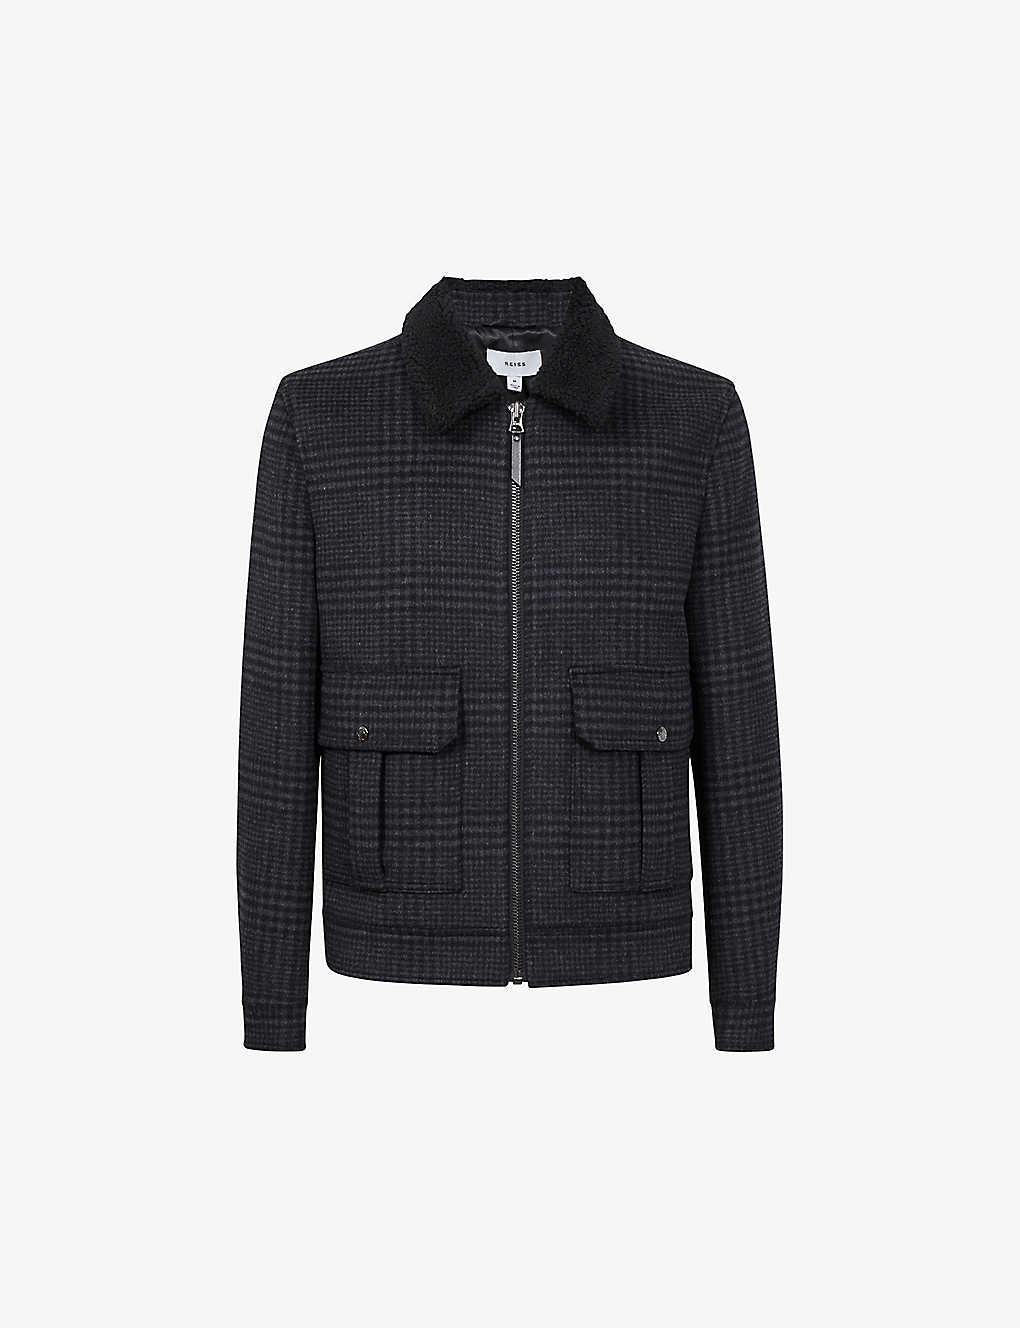 REISS REISS MEN'S NAVY ROBYN CHECKED WOOL-BLEND JACKET